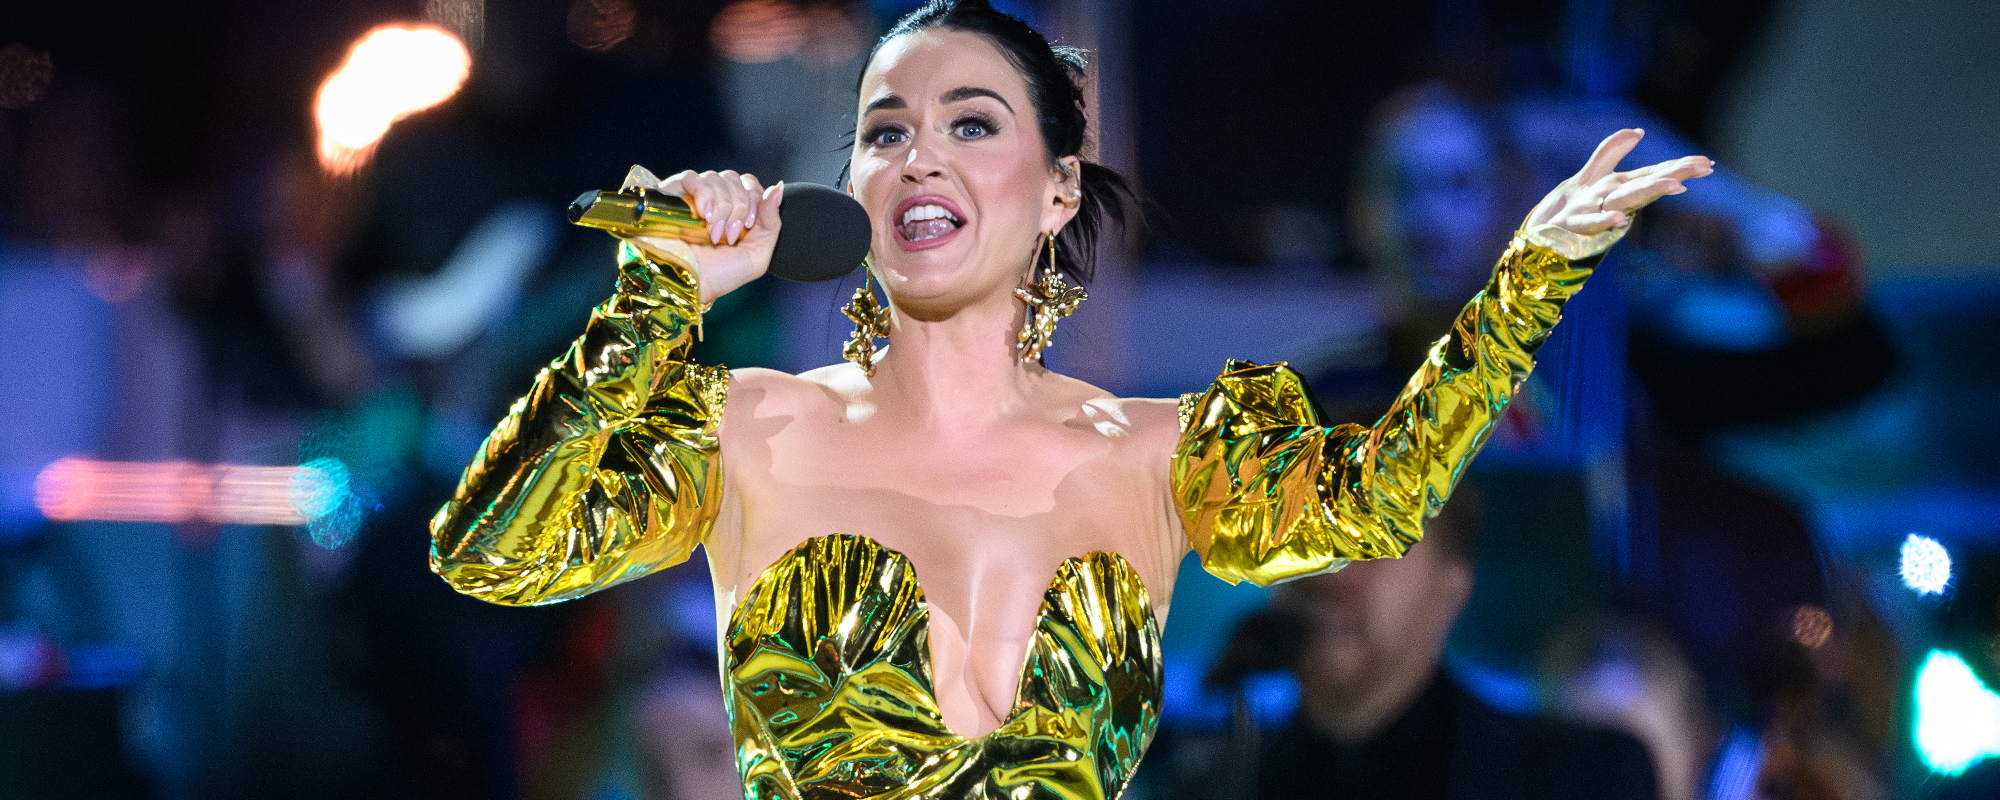 Katy Perry Takes Trip Down “Golden Ticket Road” in New ‘American Idol’ Promo